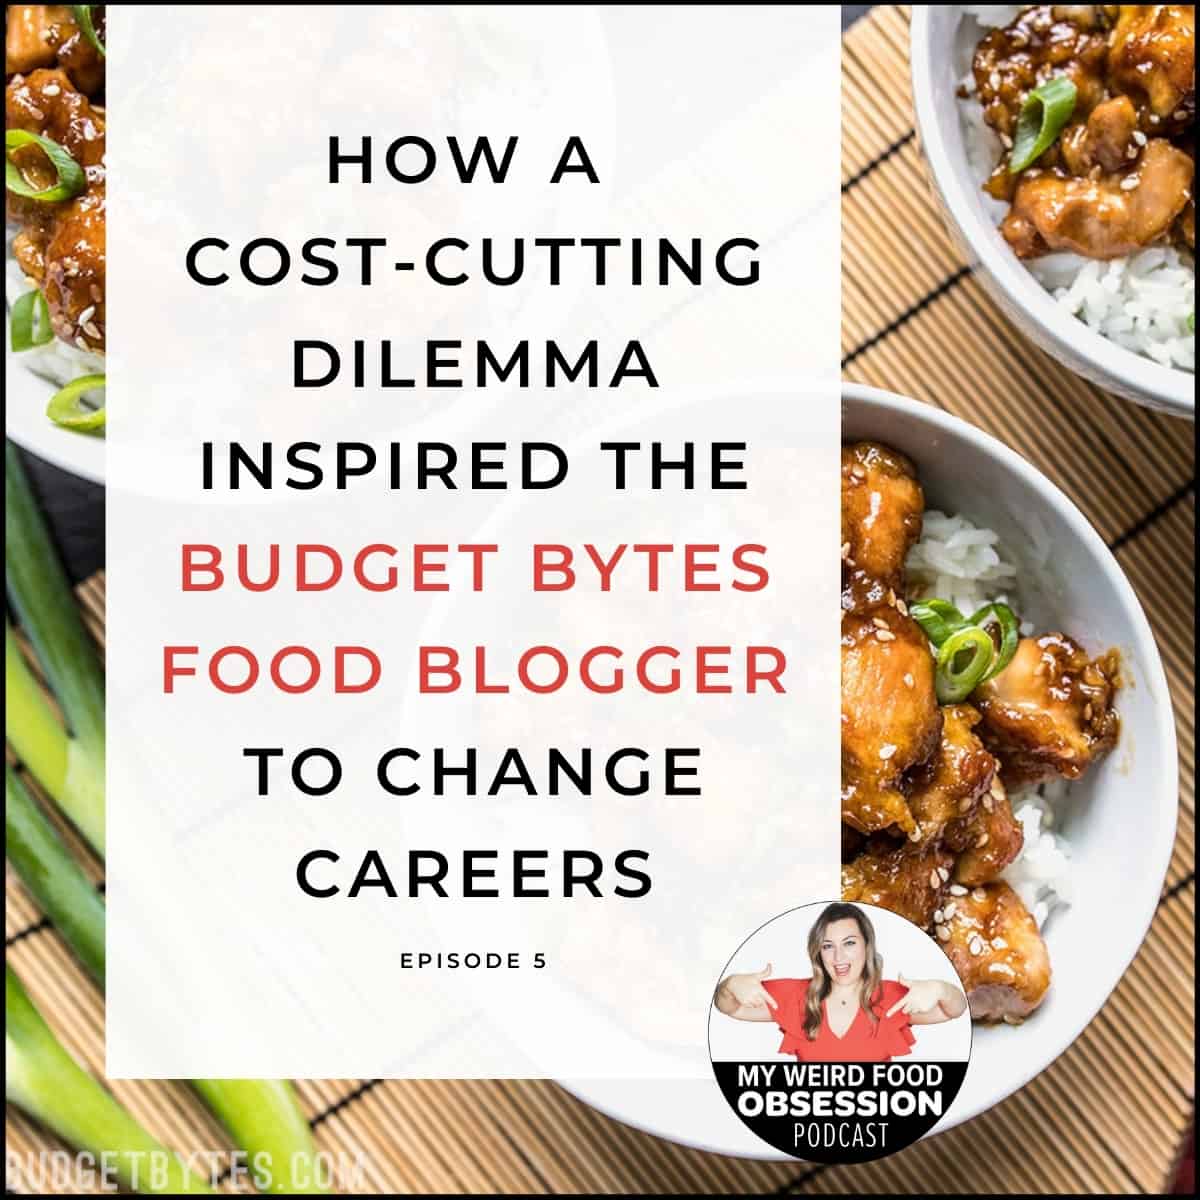 Air Fryer Chicken Wings - Budget Bytes